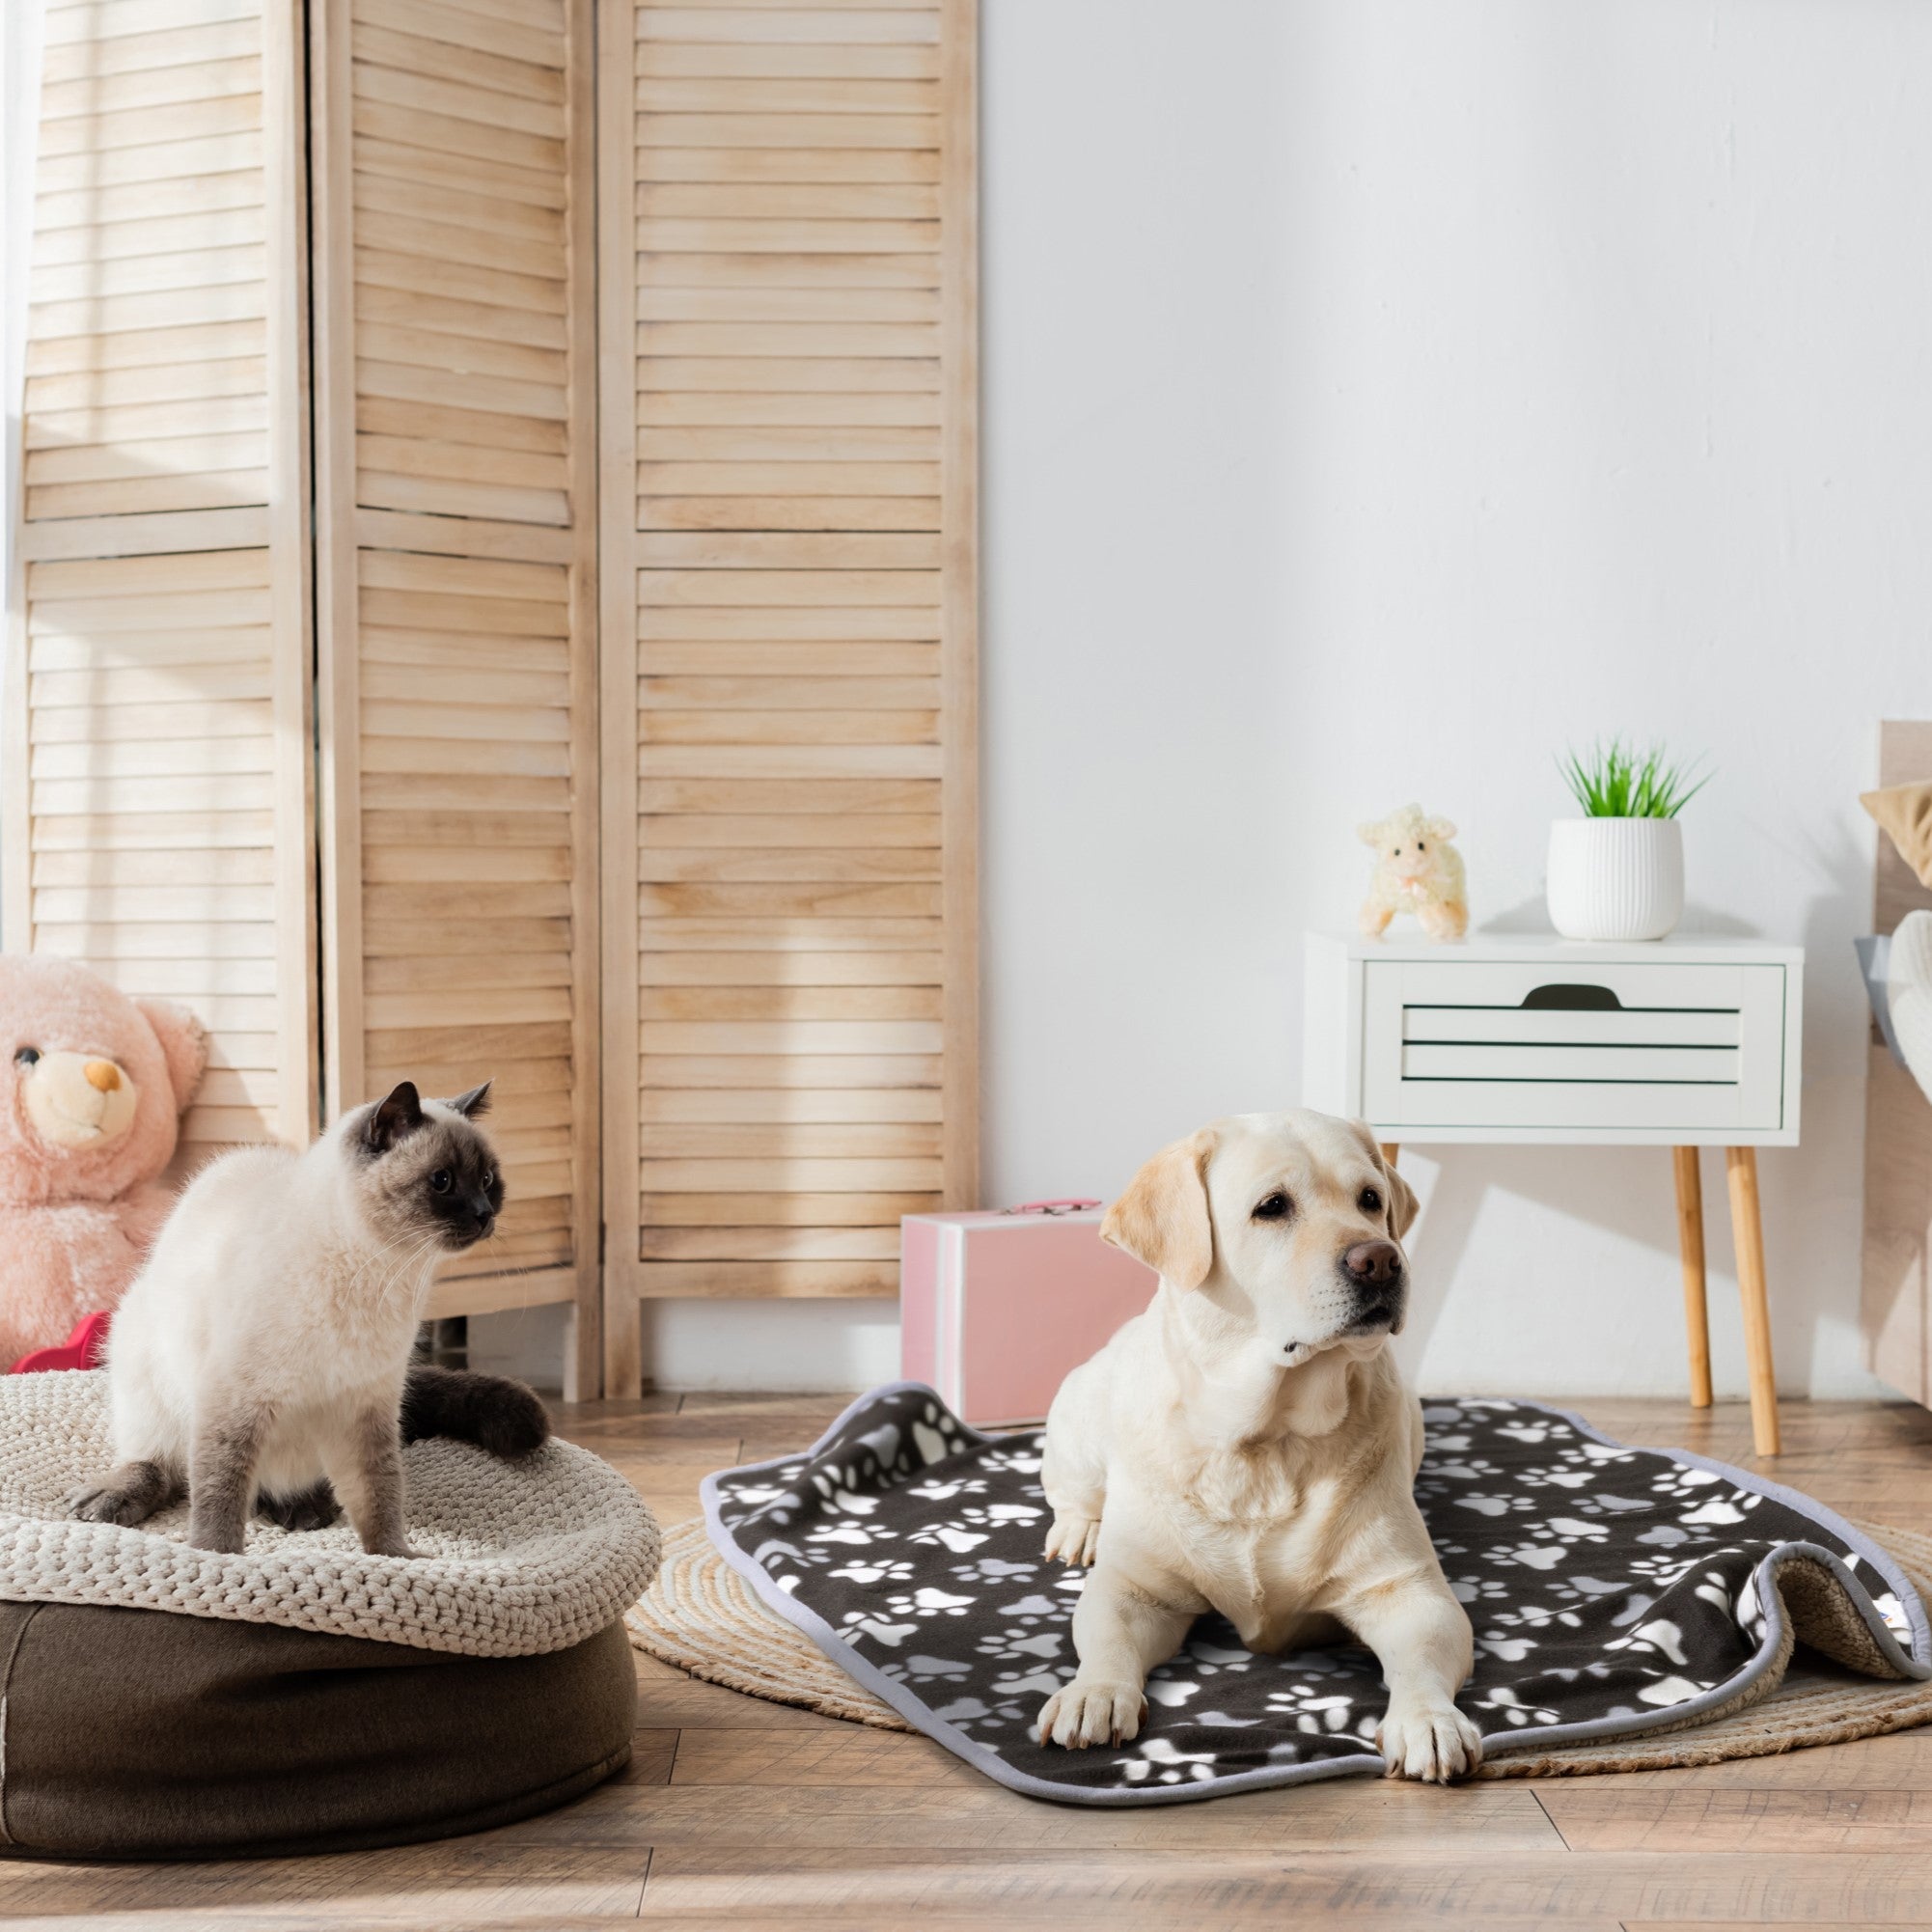 Pet bedding and blankets